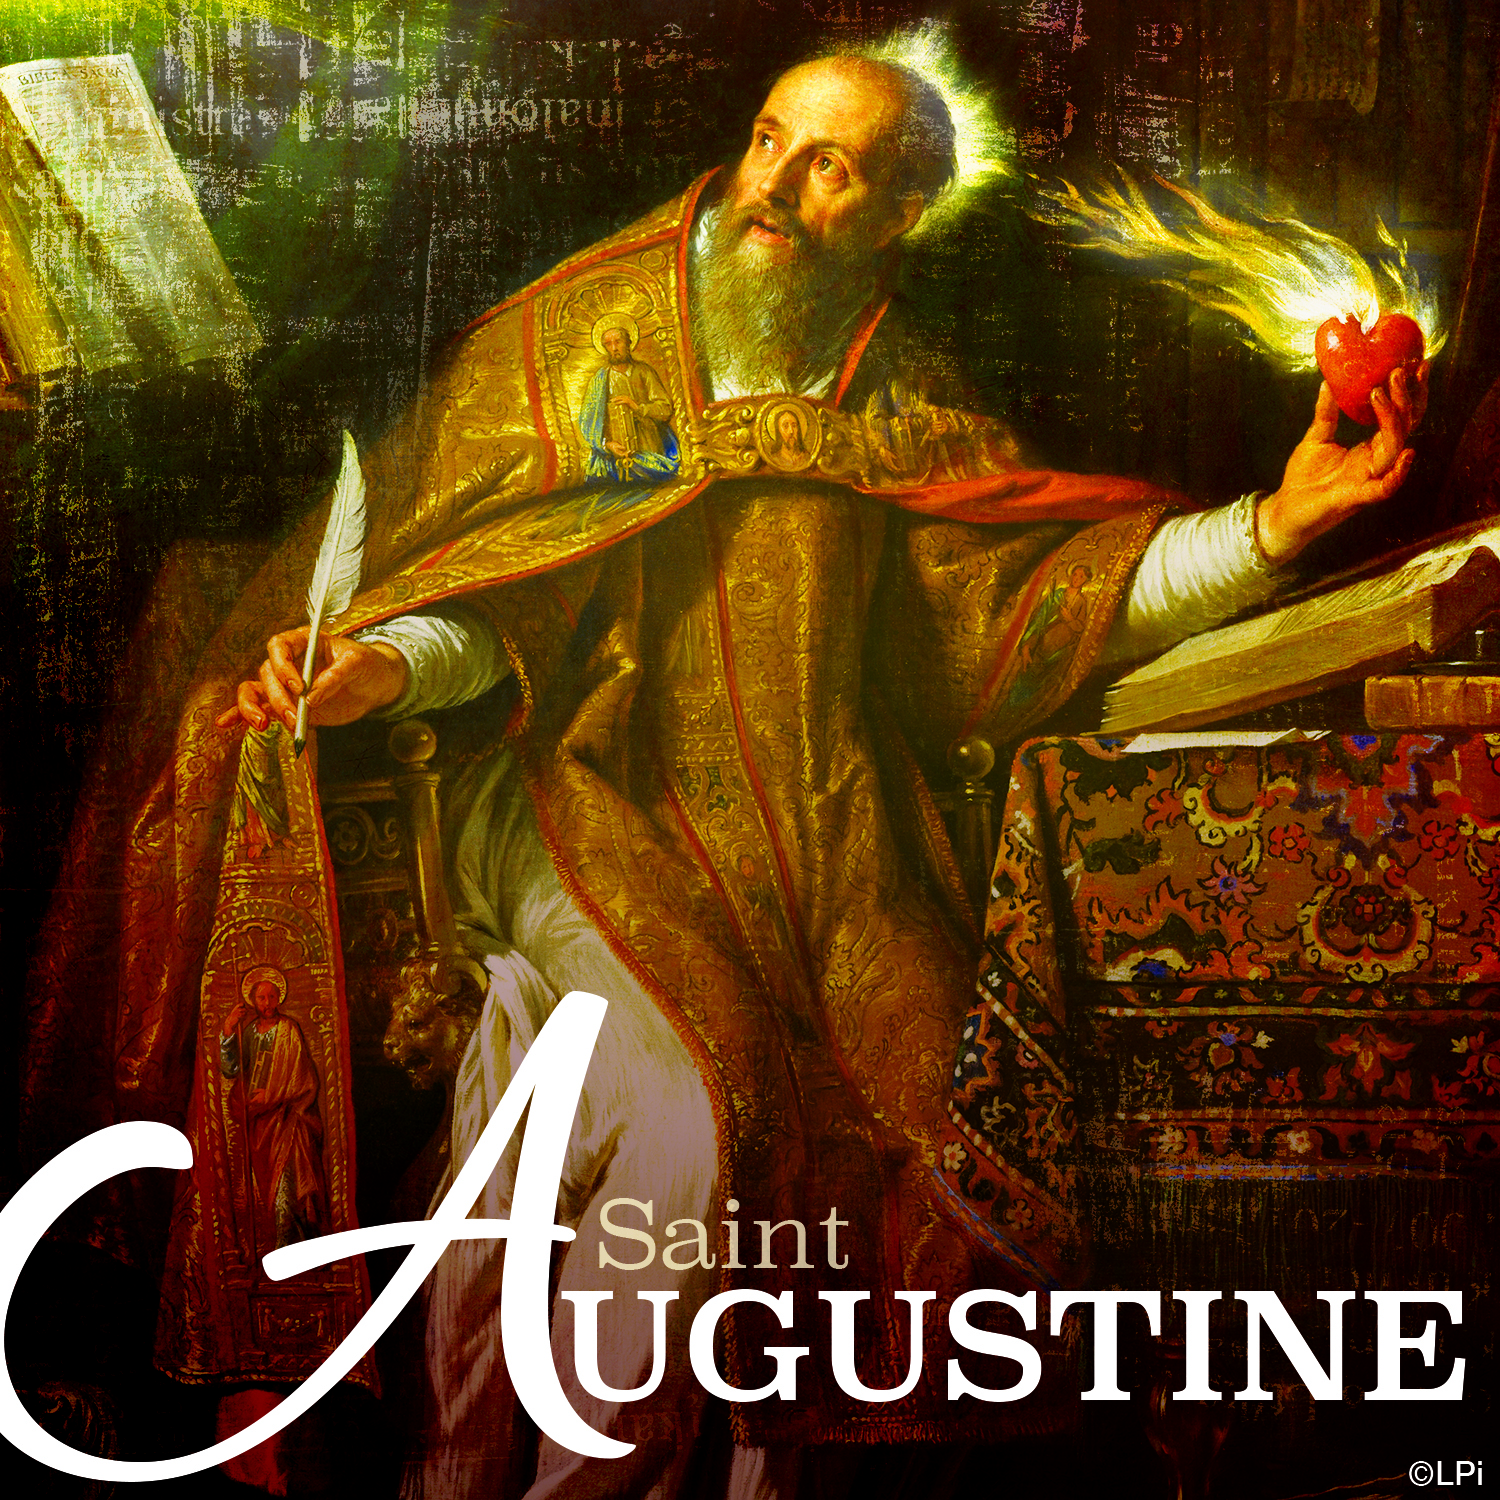 August 28, 2022 – St. Augustine, “Our hearts are restless…”